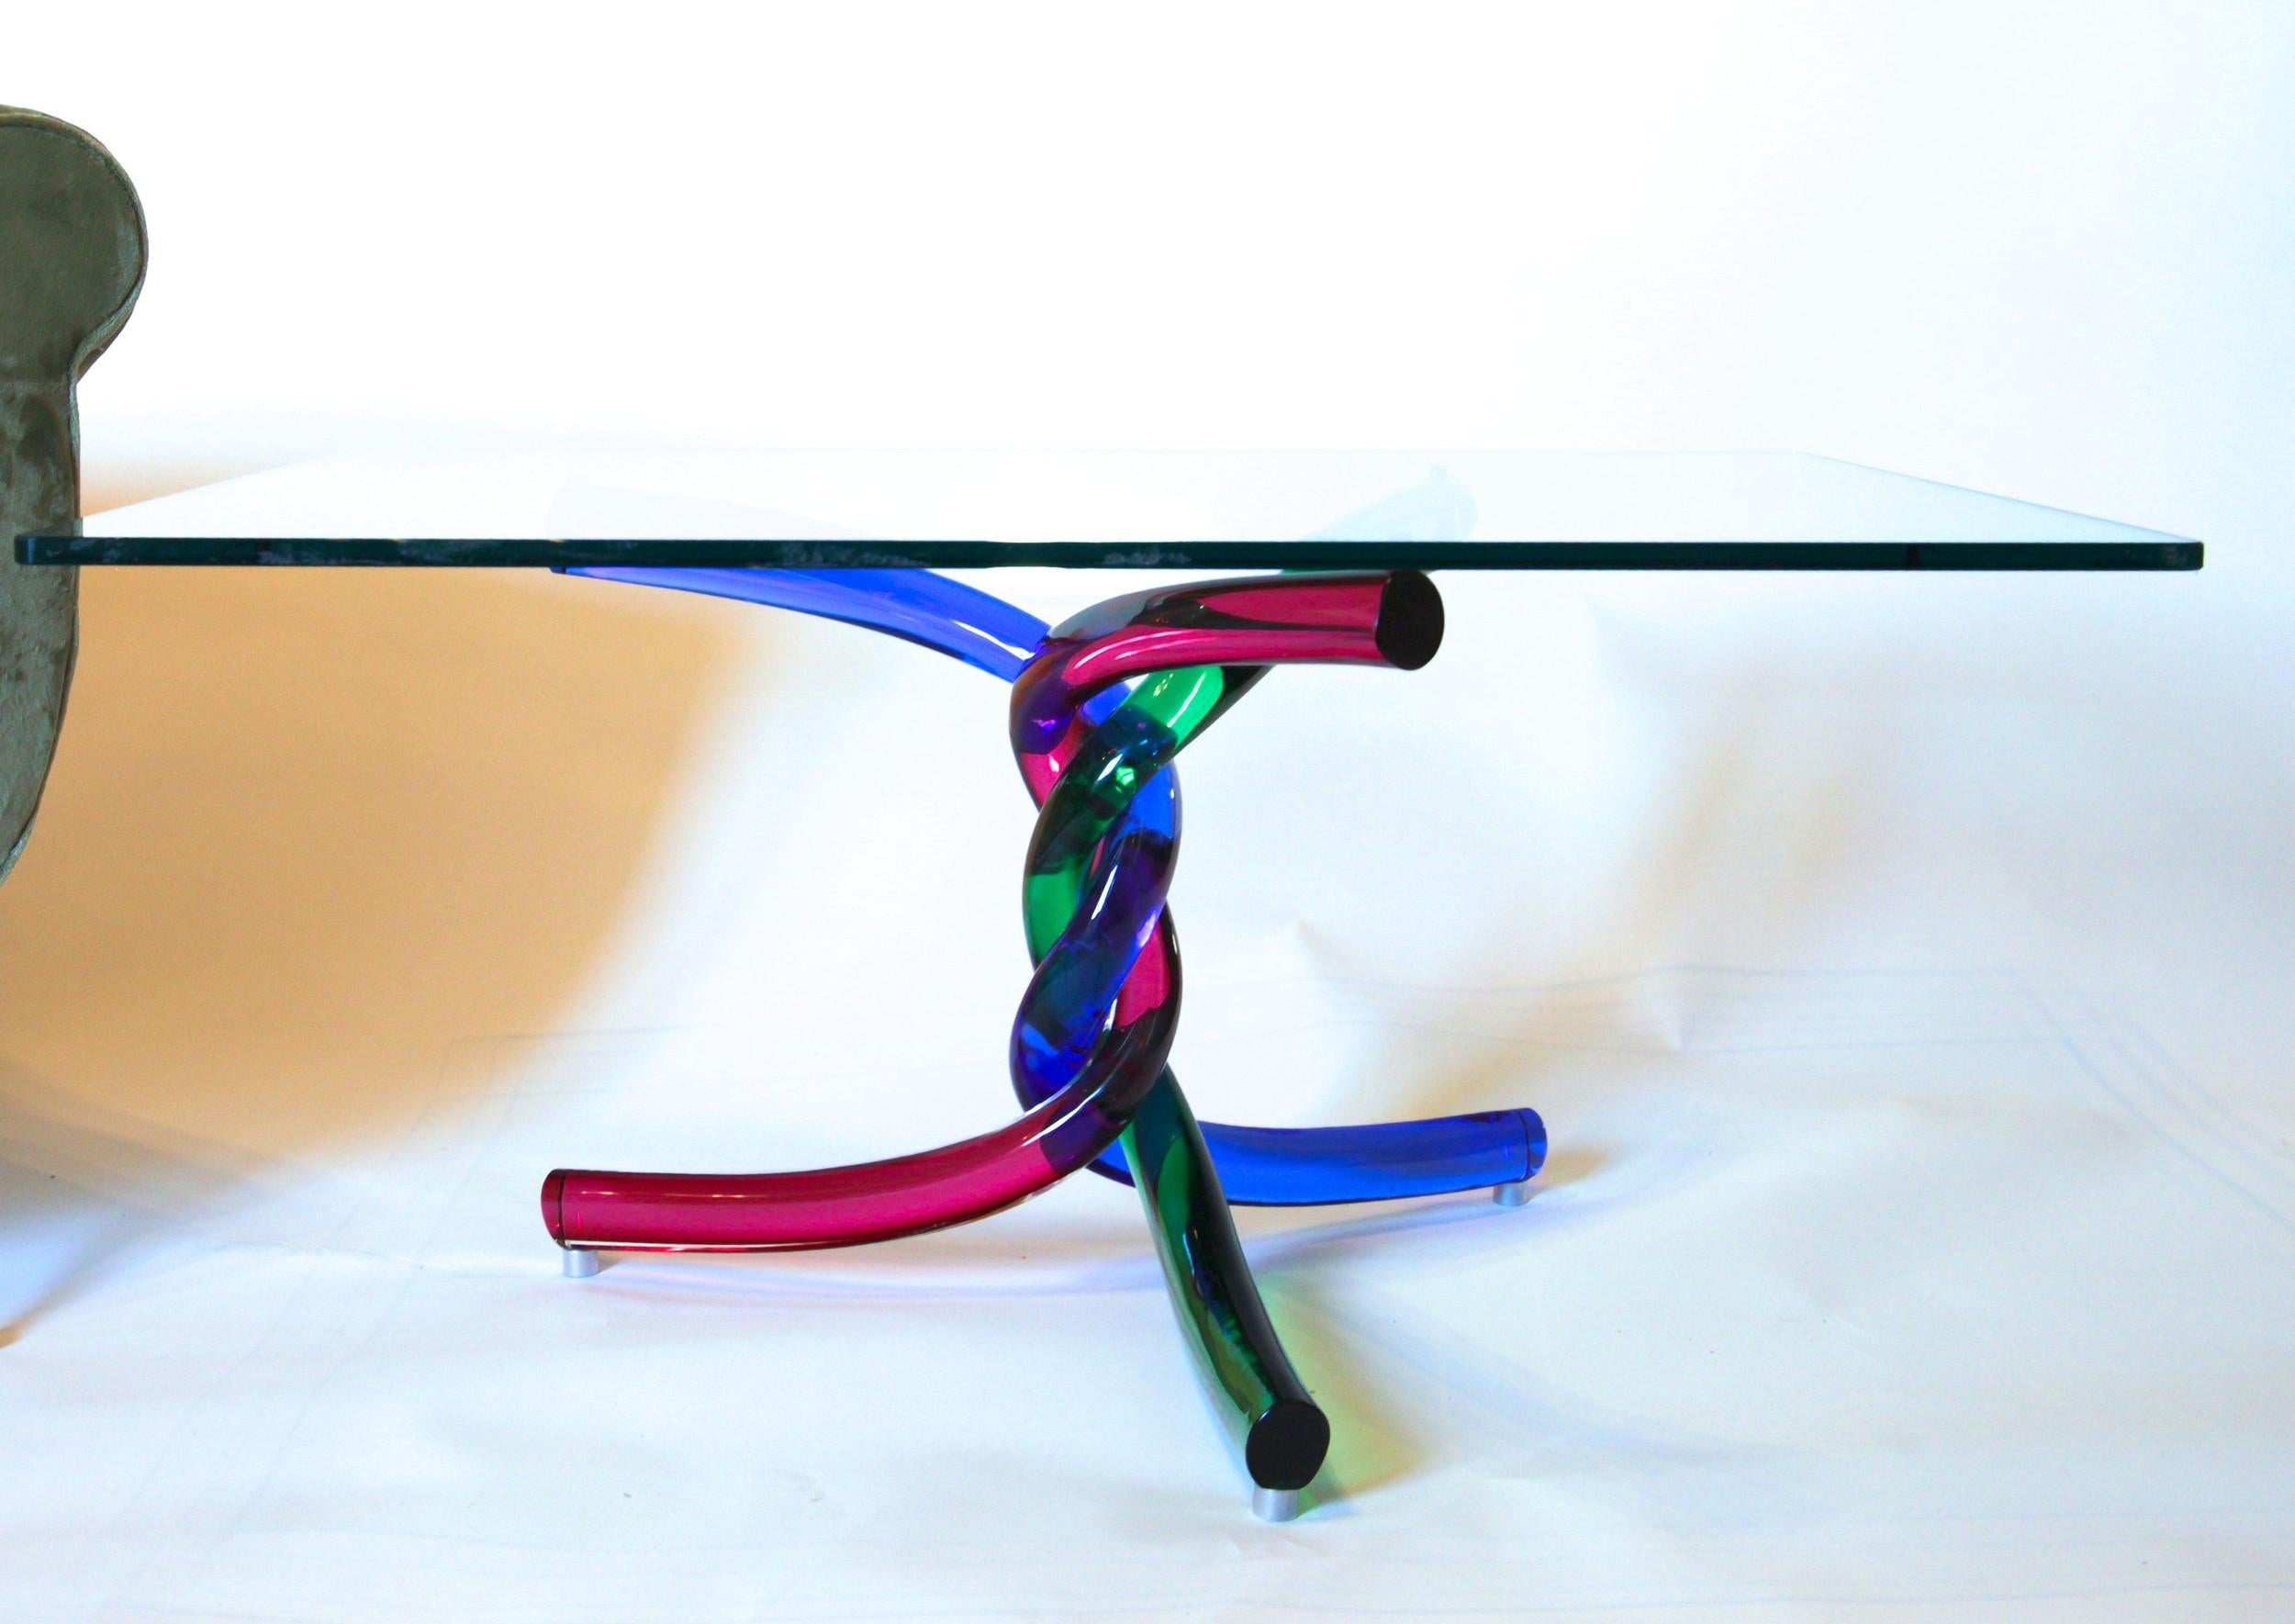 Sculptural glass table made with 3 twisted Murano made rods.

This is the first series of the Torsade cocktail table, designed by Maurice Barilone and edited by Reflex.
It's one of the best cocktail tables design that I have seen. An incredible